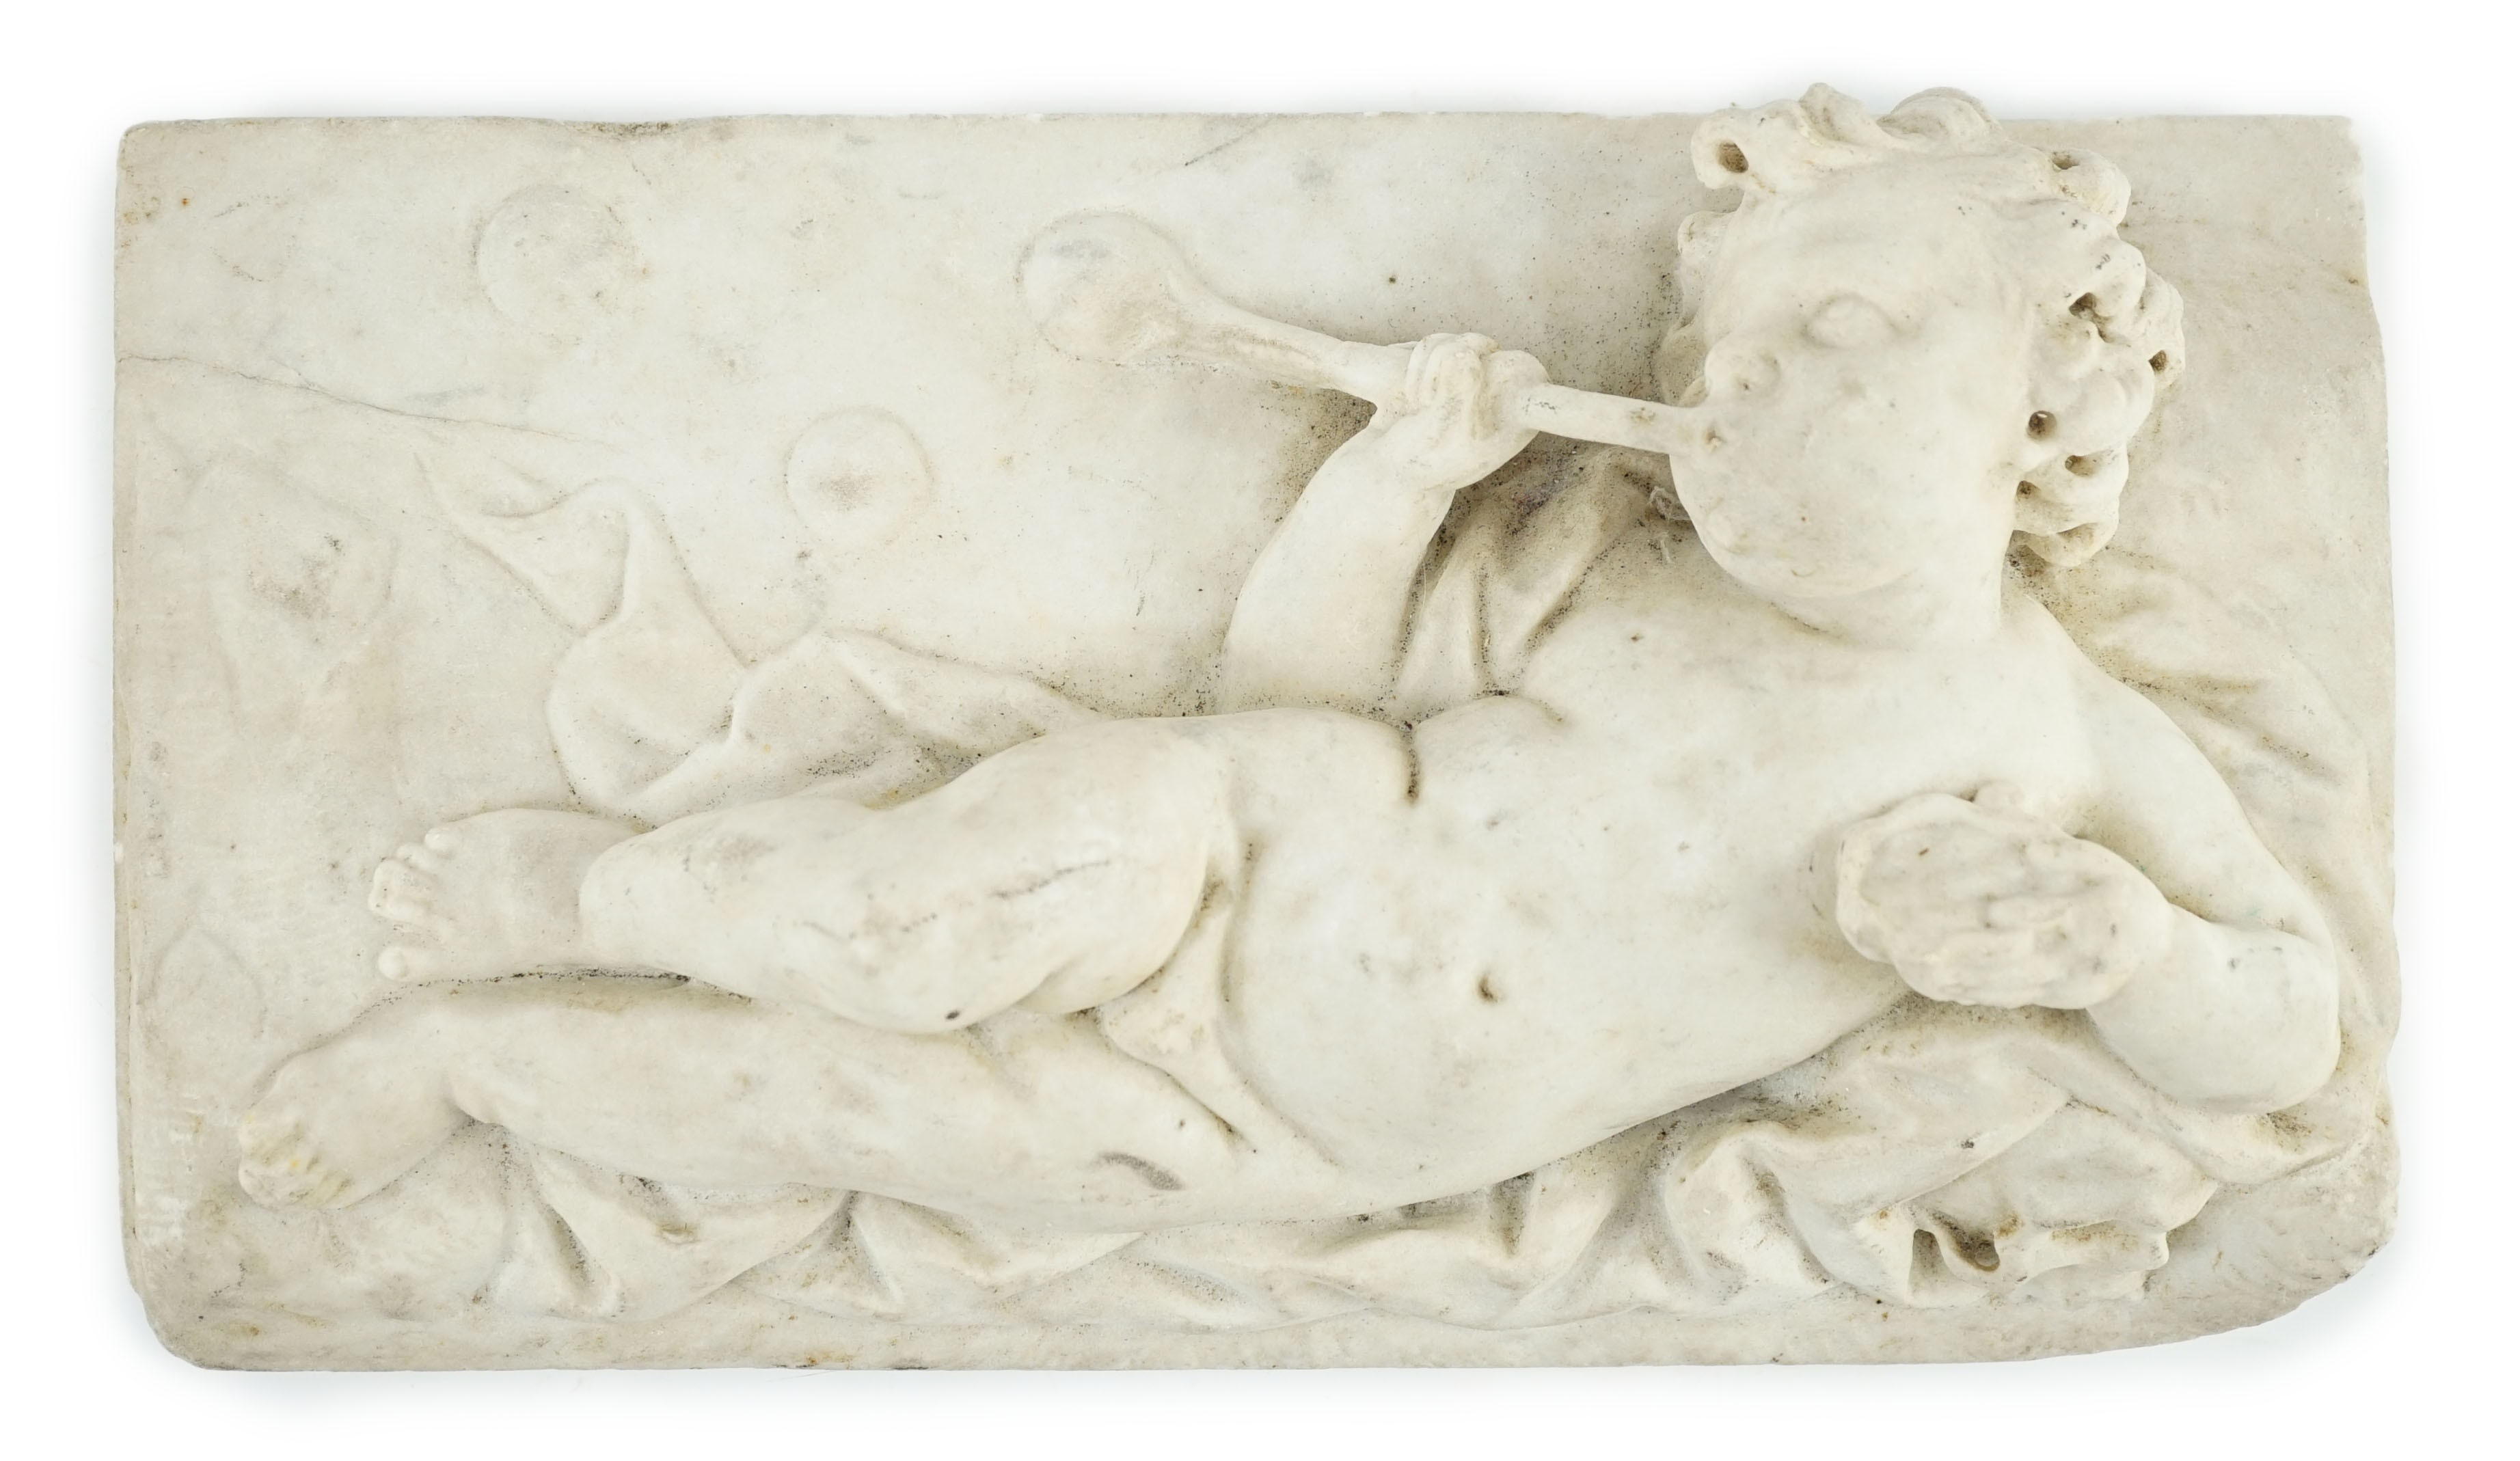 A 17th/18th century Italian marble plaque carved with a reclining cherub, 19.5 x 34.5cm                                                                                                                                     